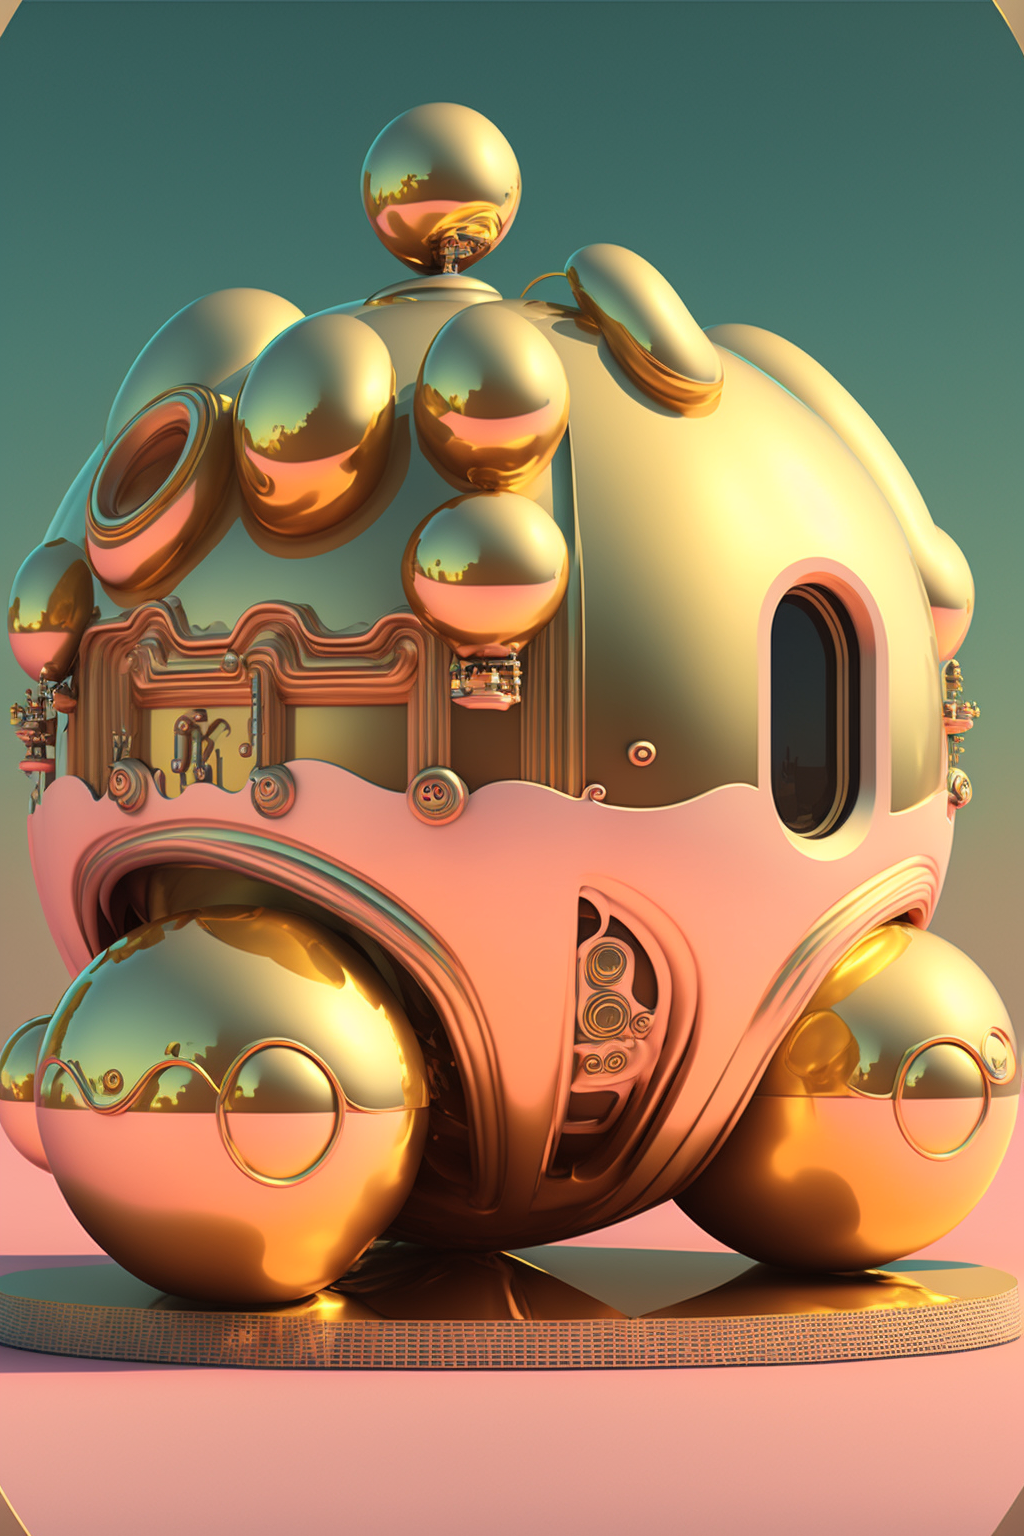 Luxury in the style of Stylized Blobby-Futurism 5